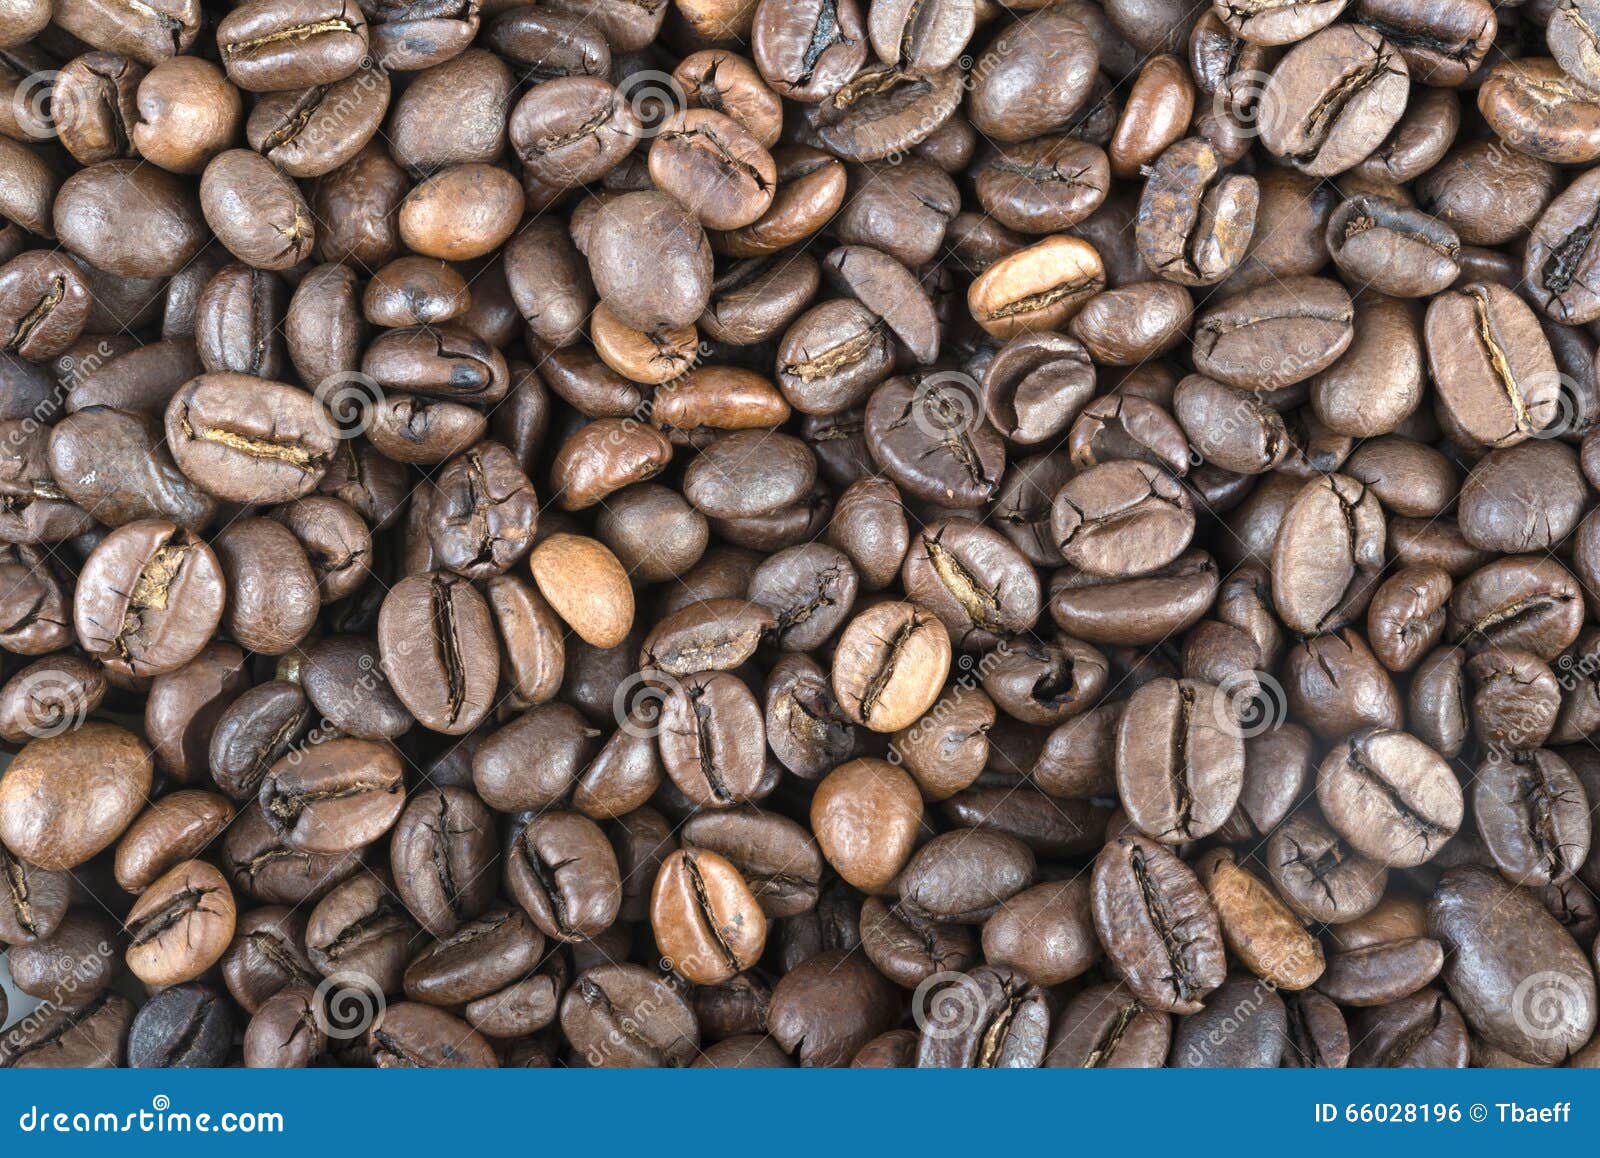 loos coffee background